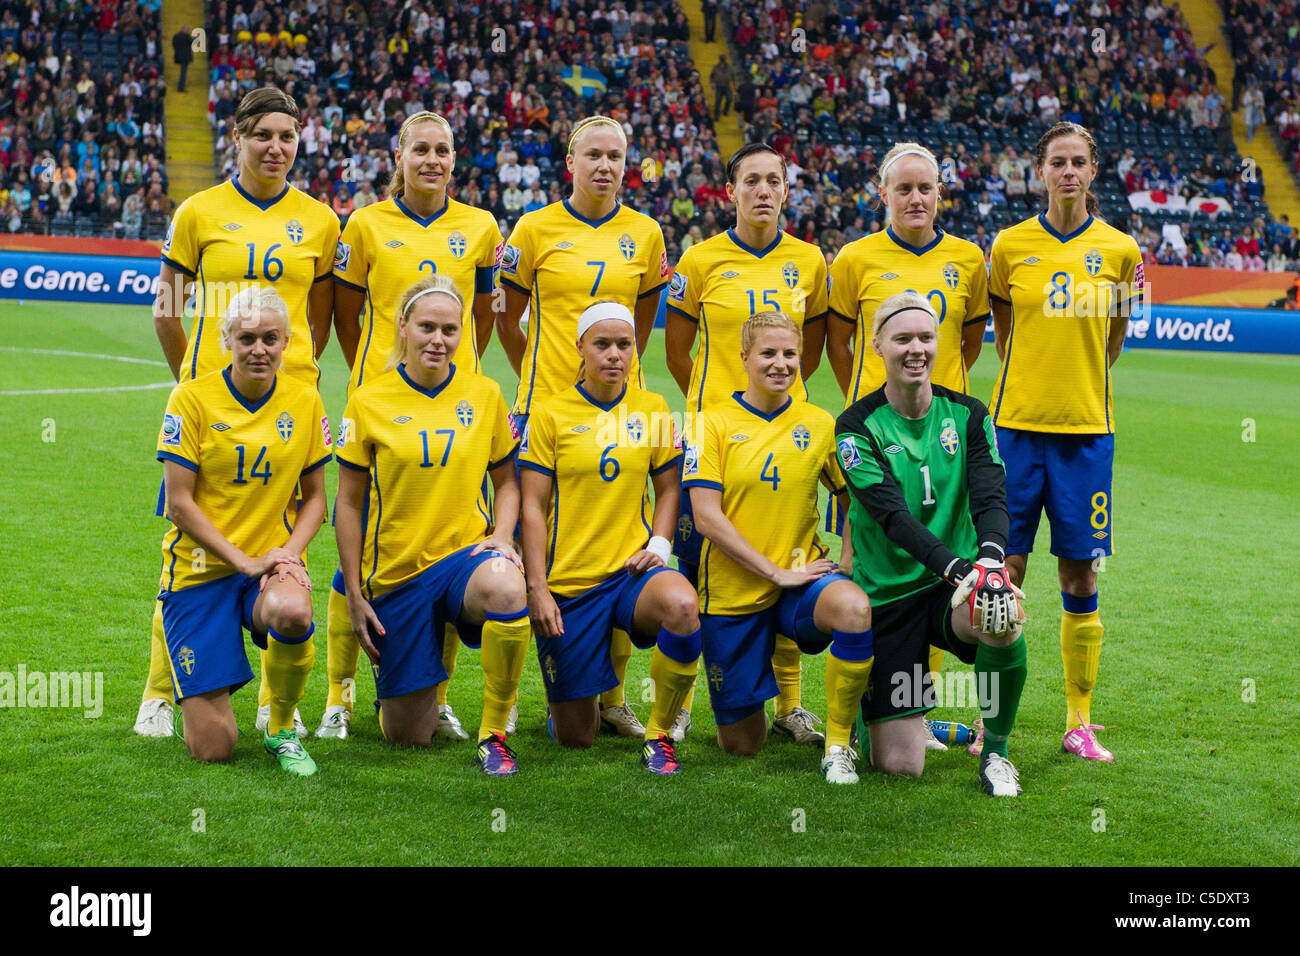 Sweden team group poses FIFA Women's World Cup Germany 2011 Semi-final match between Japan 3-1 Sweden. Stock Photo